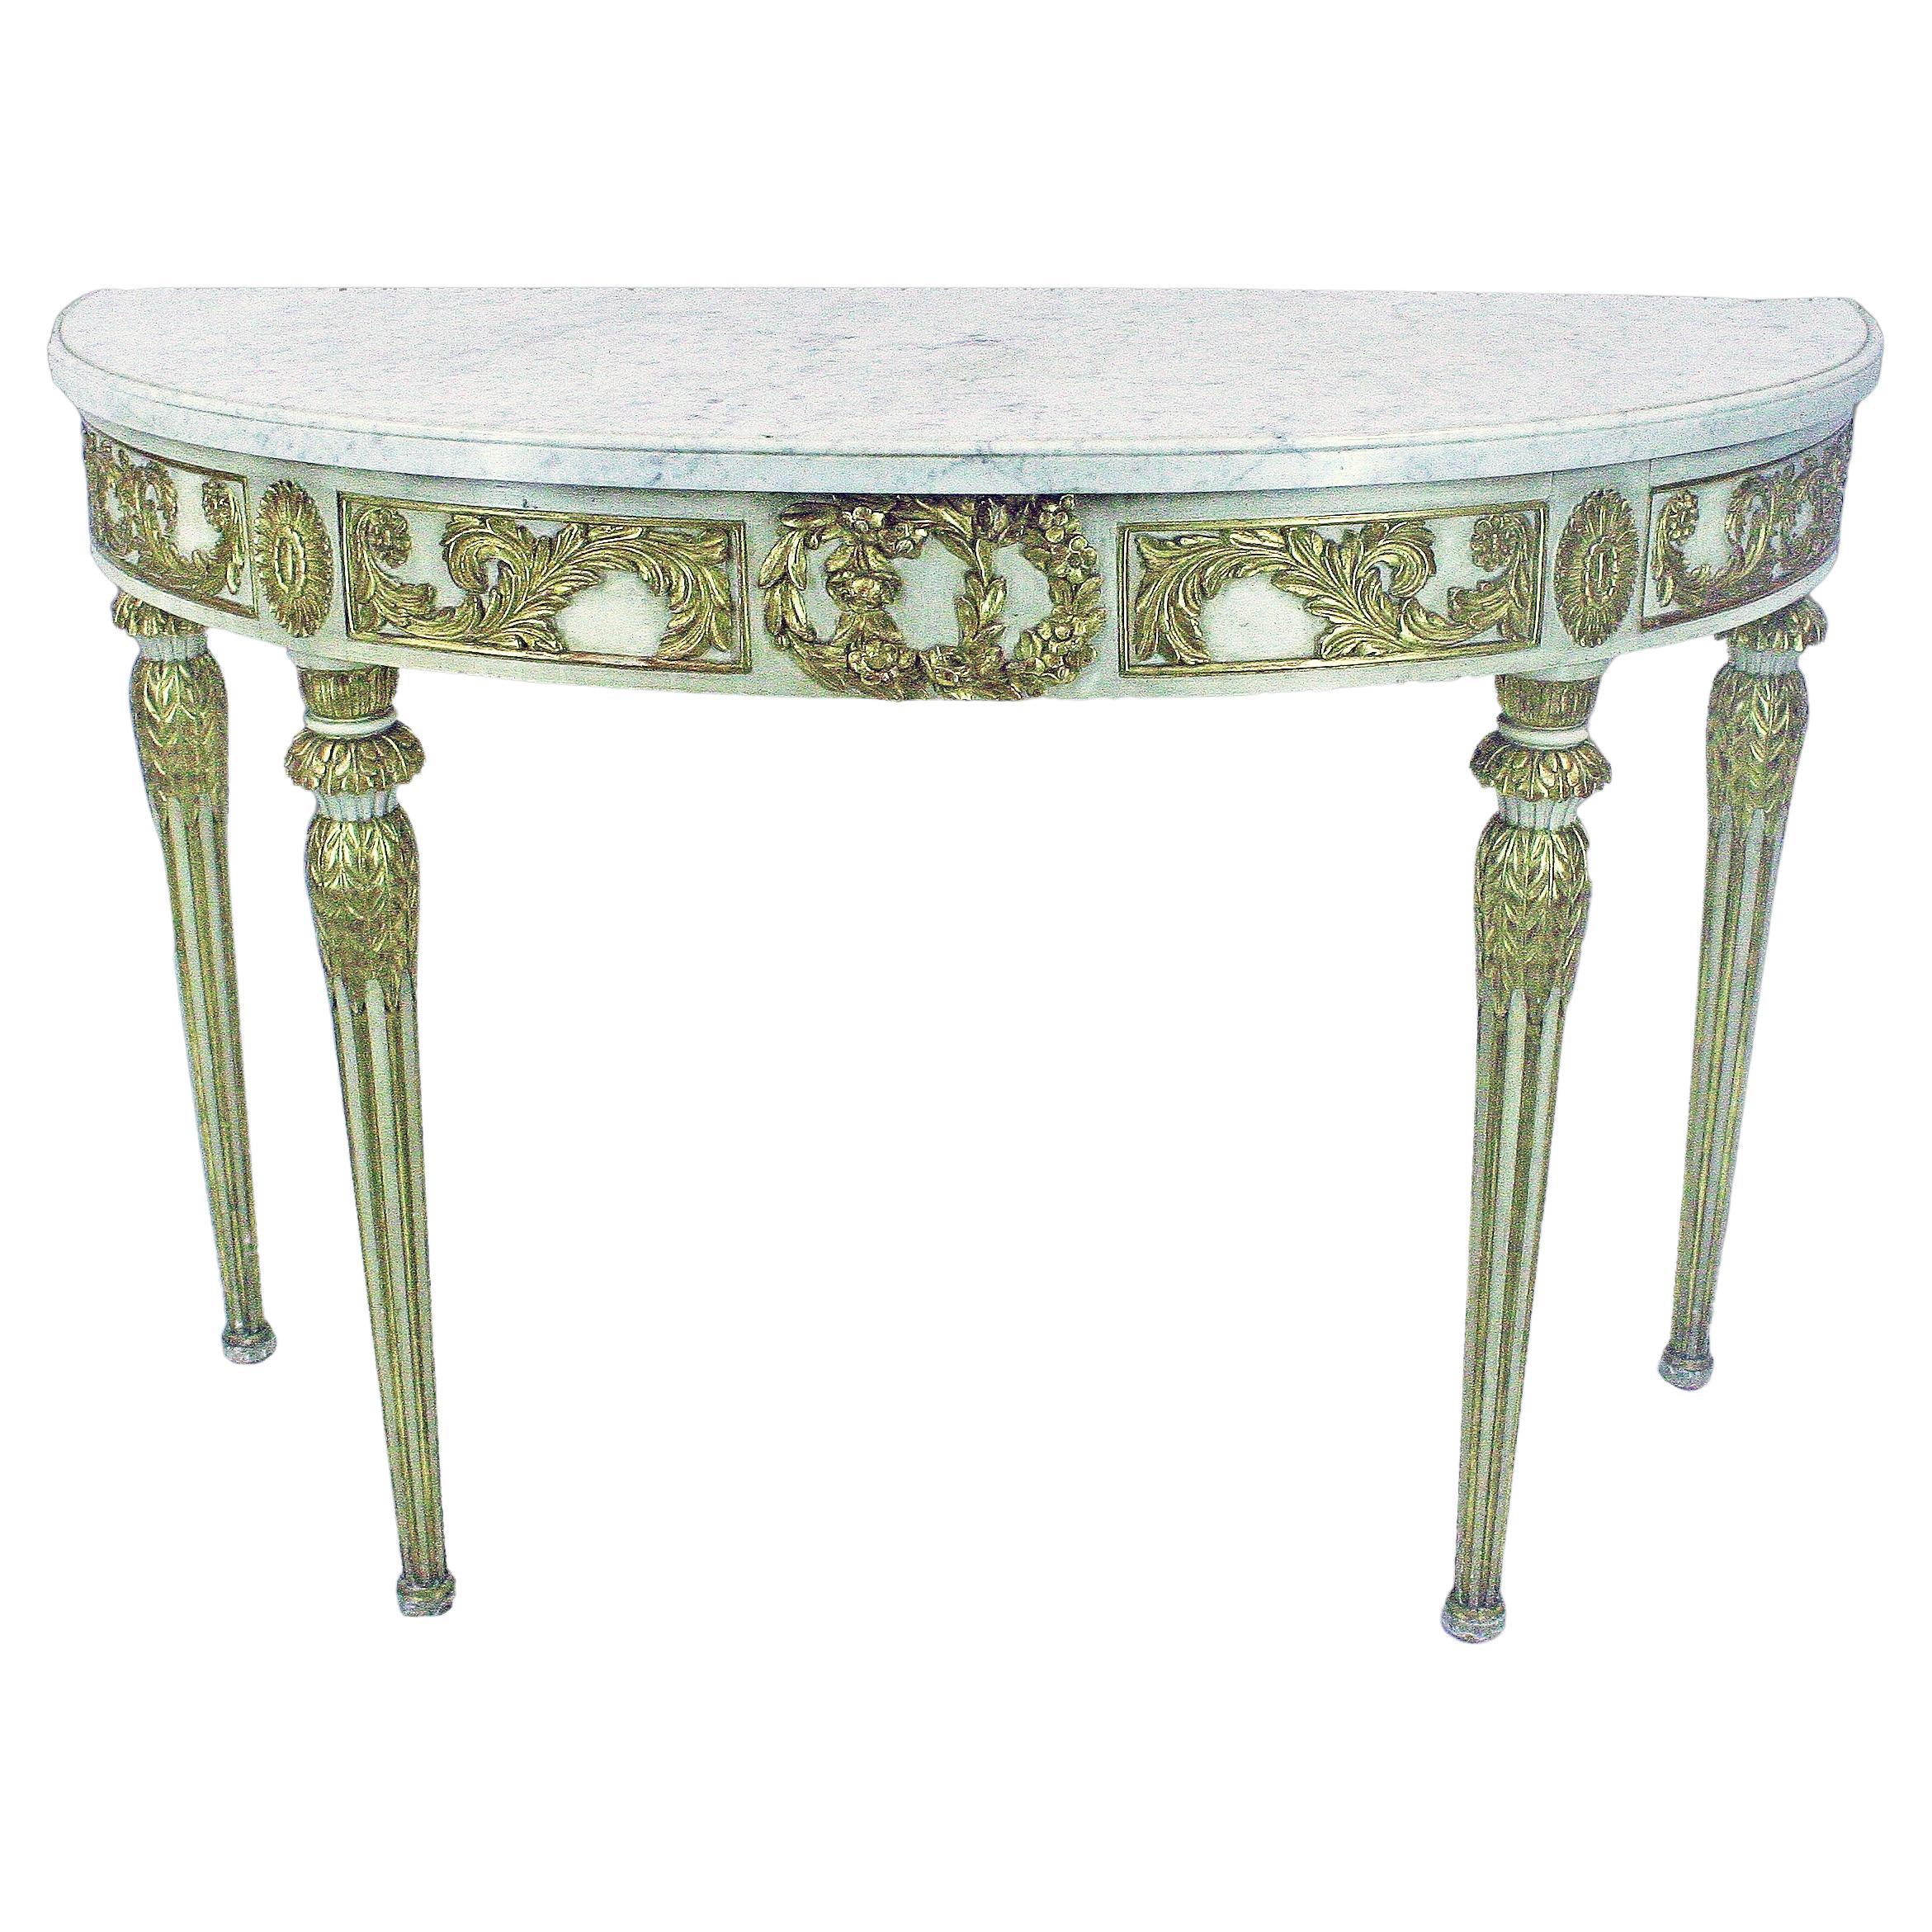 Mid-20th C. Argentine Giltwood and Marble Demi-Lune Console by Maison Jansen For Sale